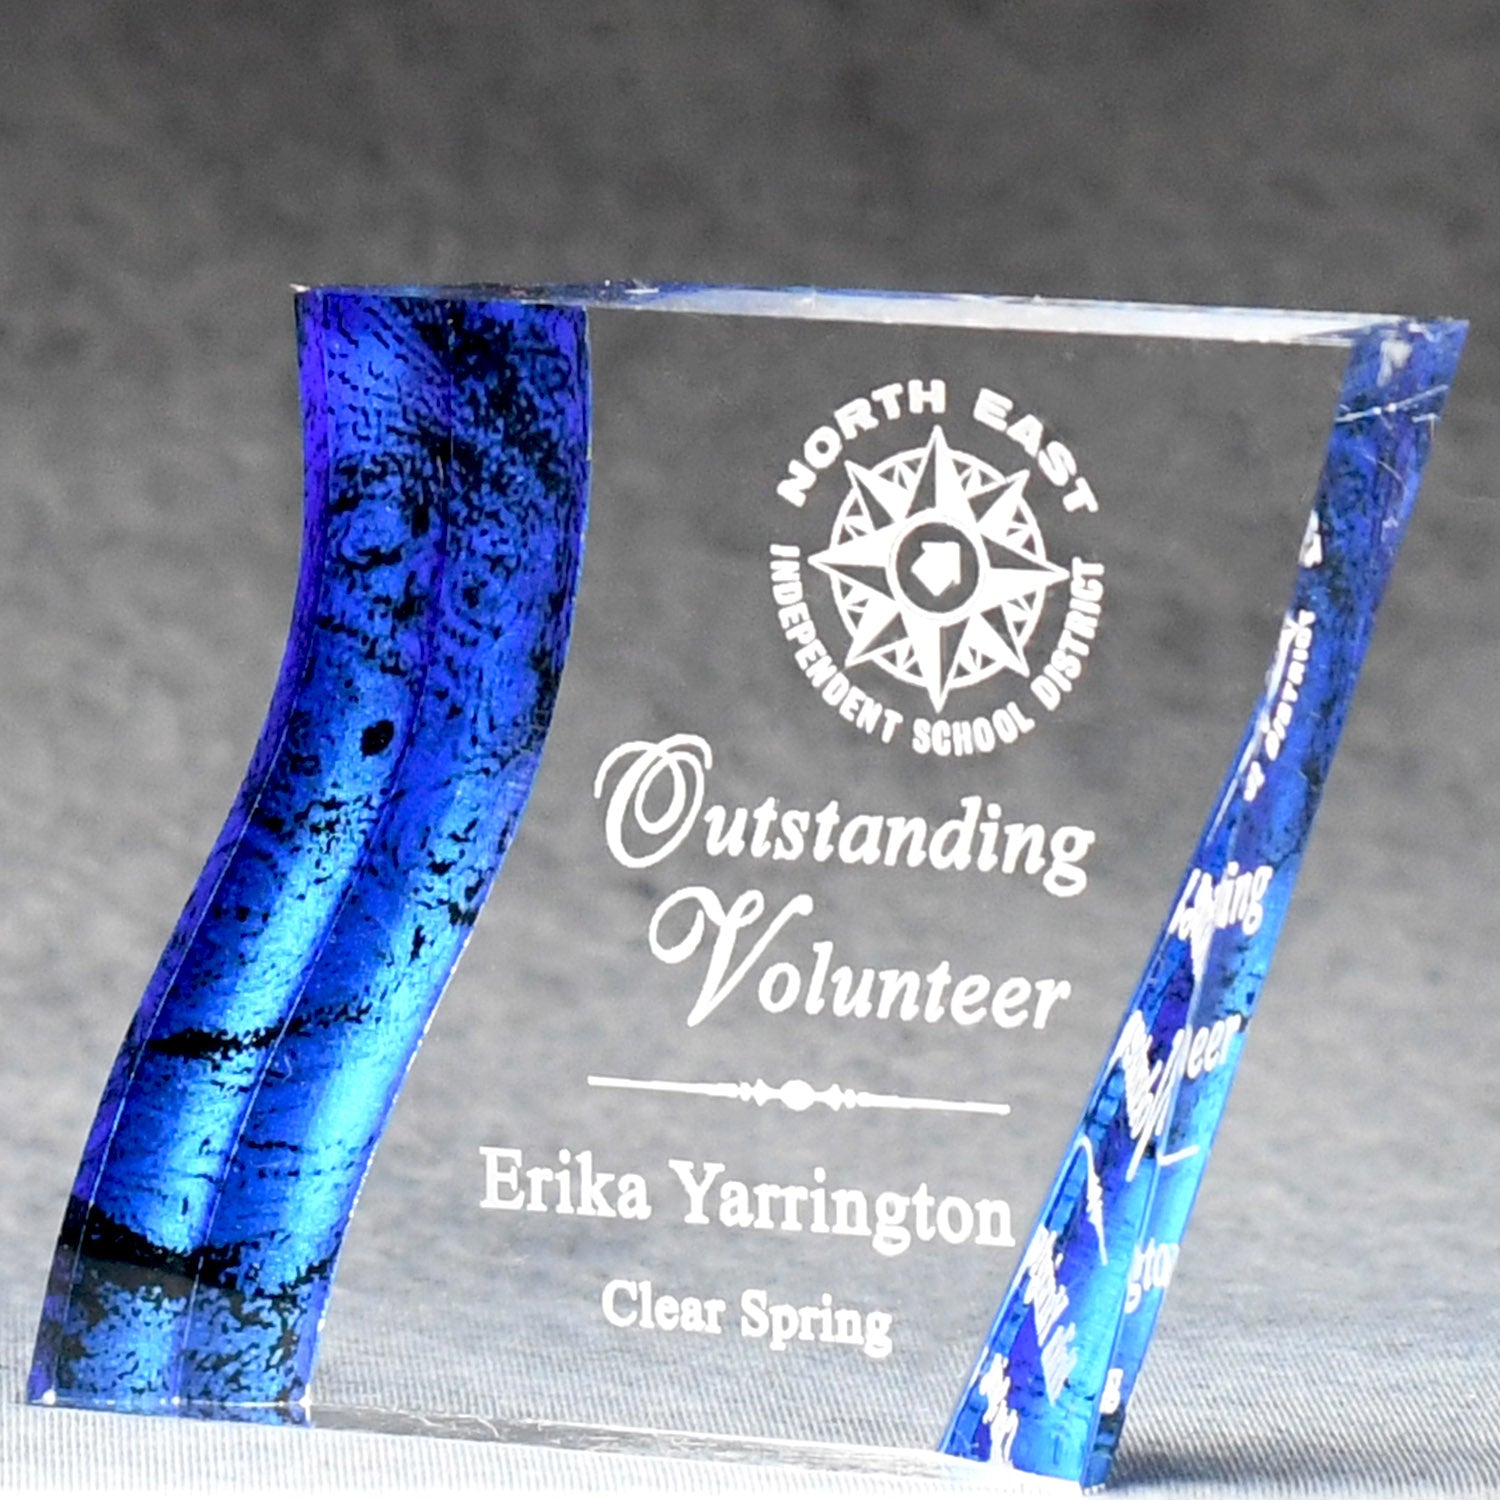 Acrylic Wave Paperweight Award - Blue - Nothers